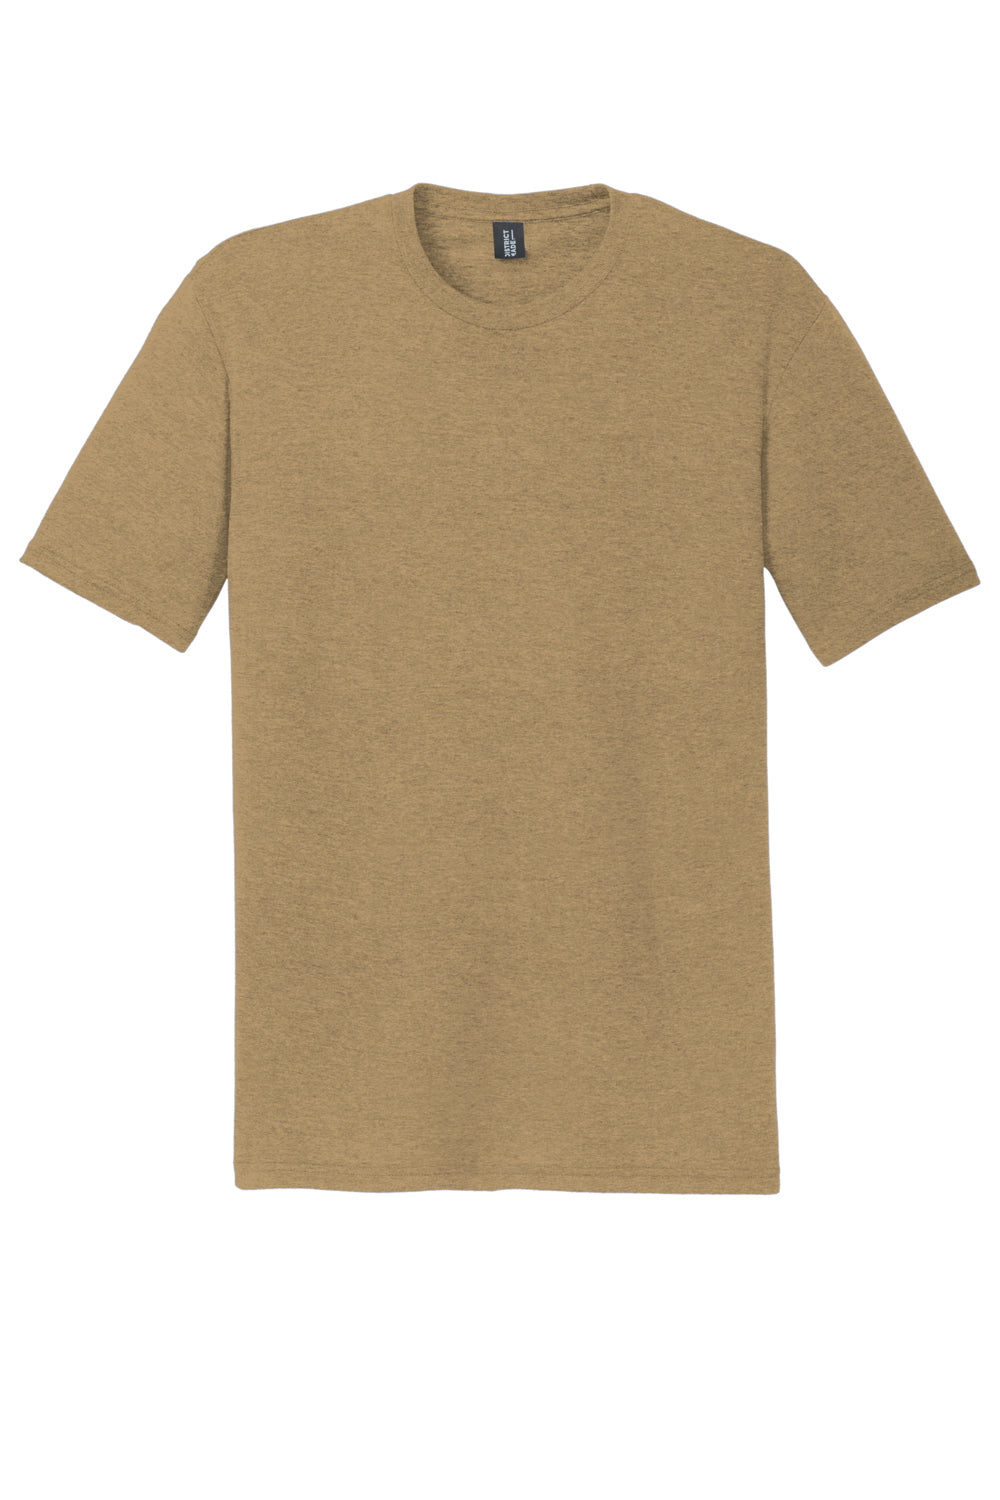 District DM130 Mens Perfect Tri Short Sleeve Crewneck T-Shirt Heather Coyote Brown Flat Front